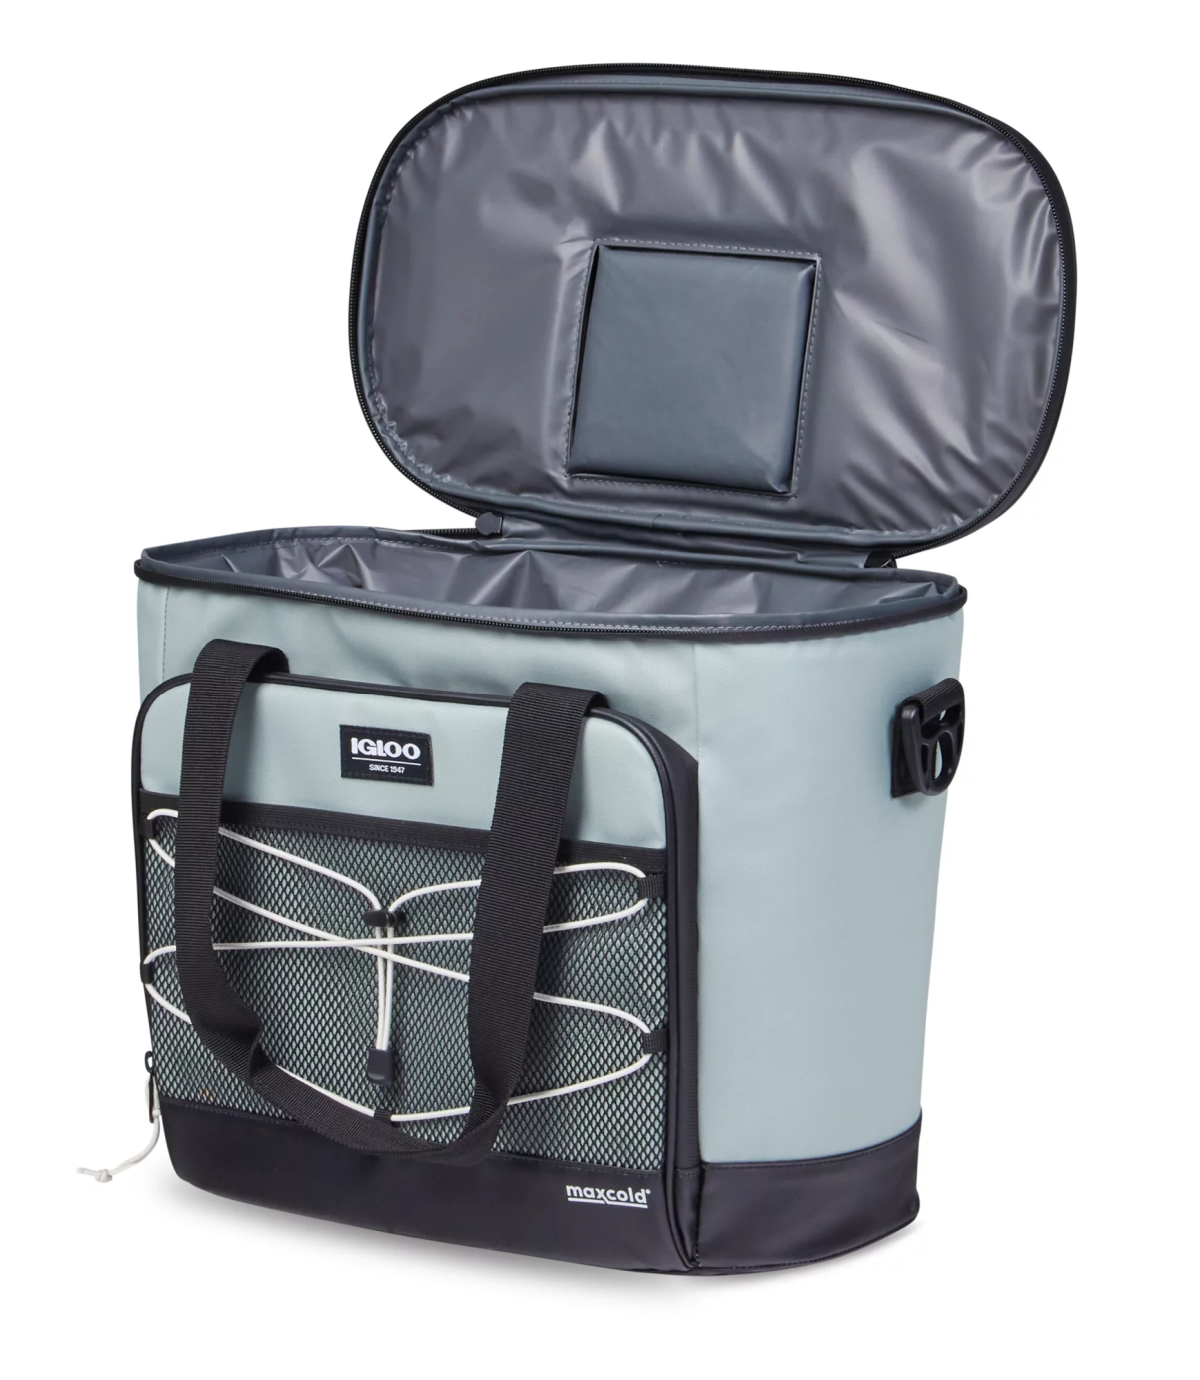 An Igloo Overland cooler bag from Walmart which is an alternative to yeti soft coolers